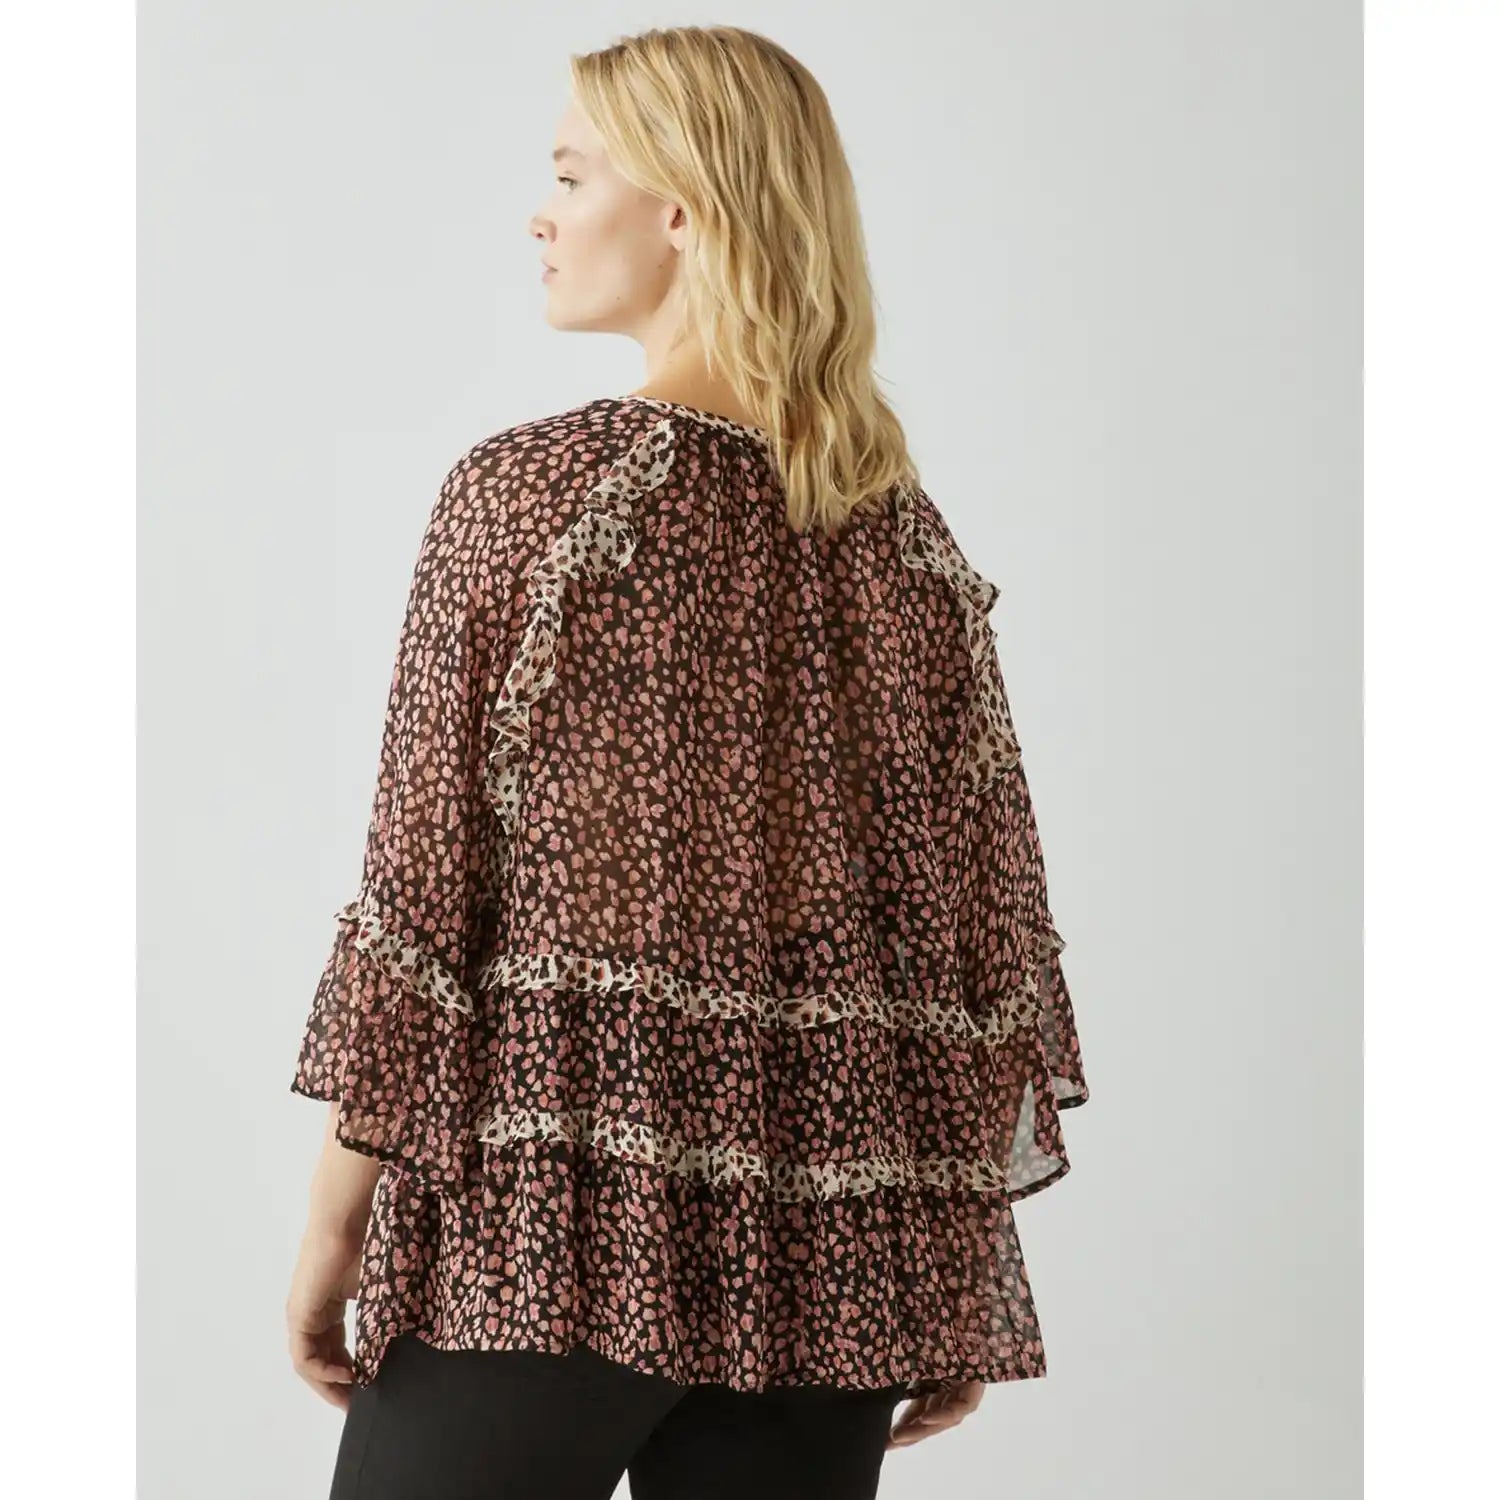 Couchel Ruffled Print Blouse - Multi 3 Shaws Department Stores